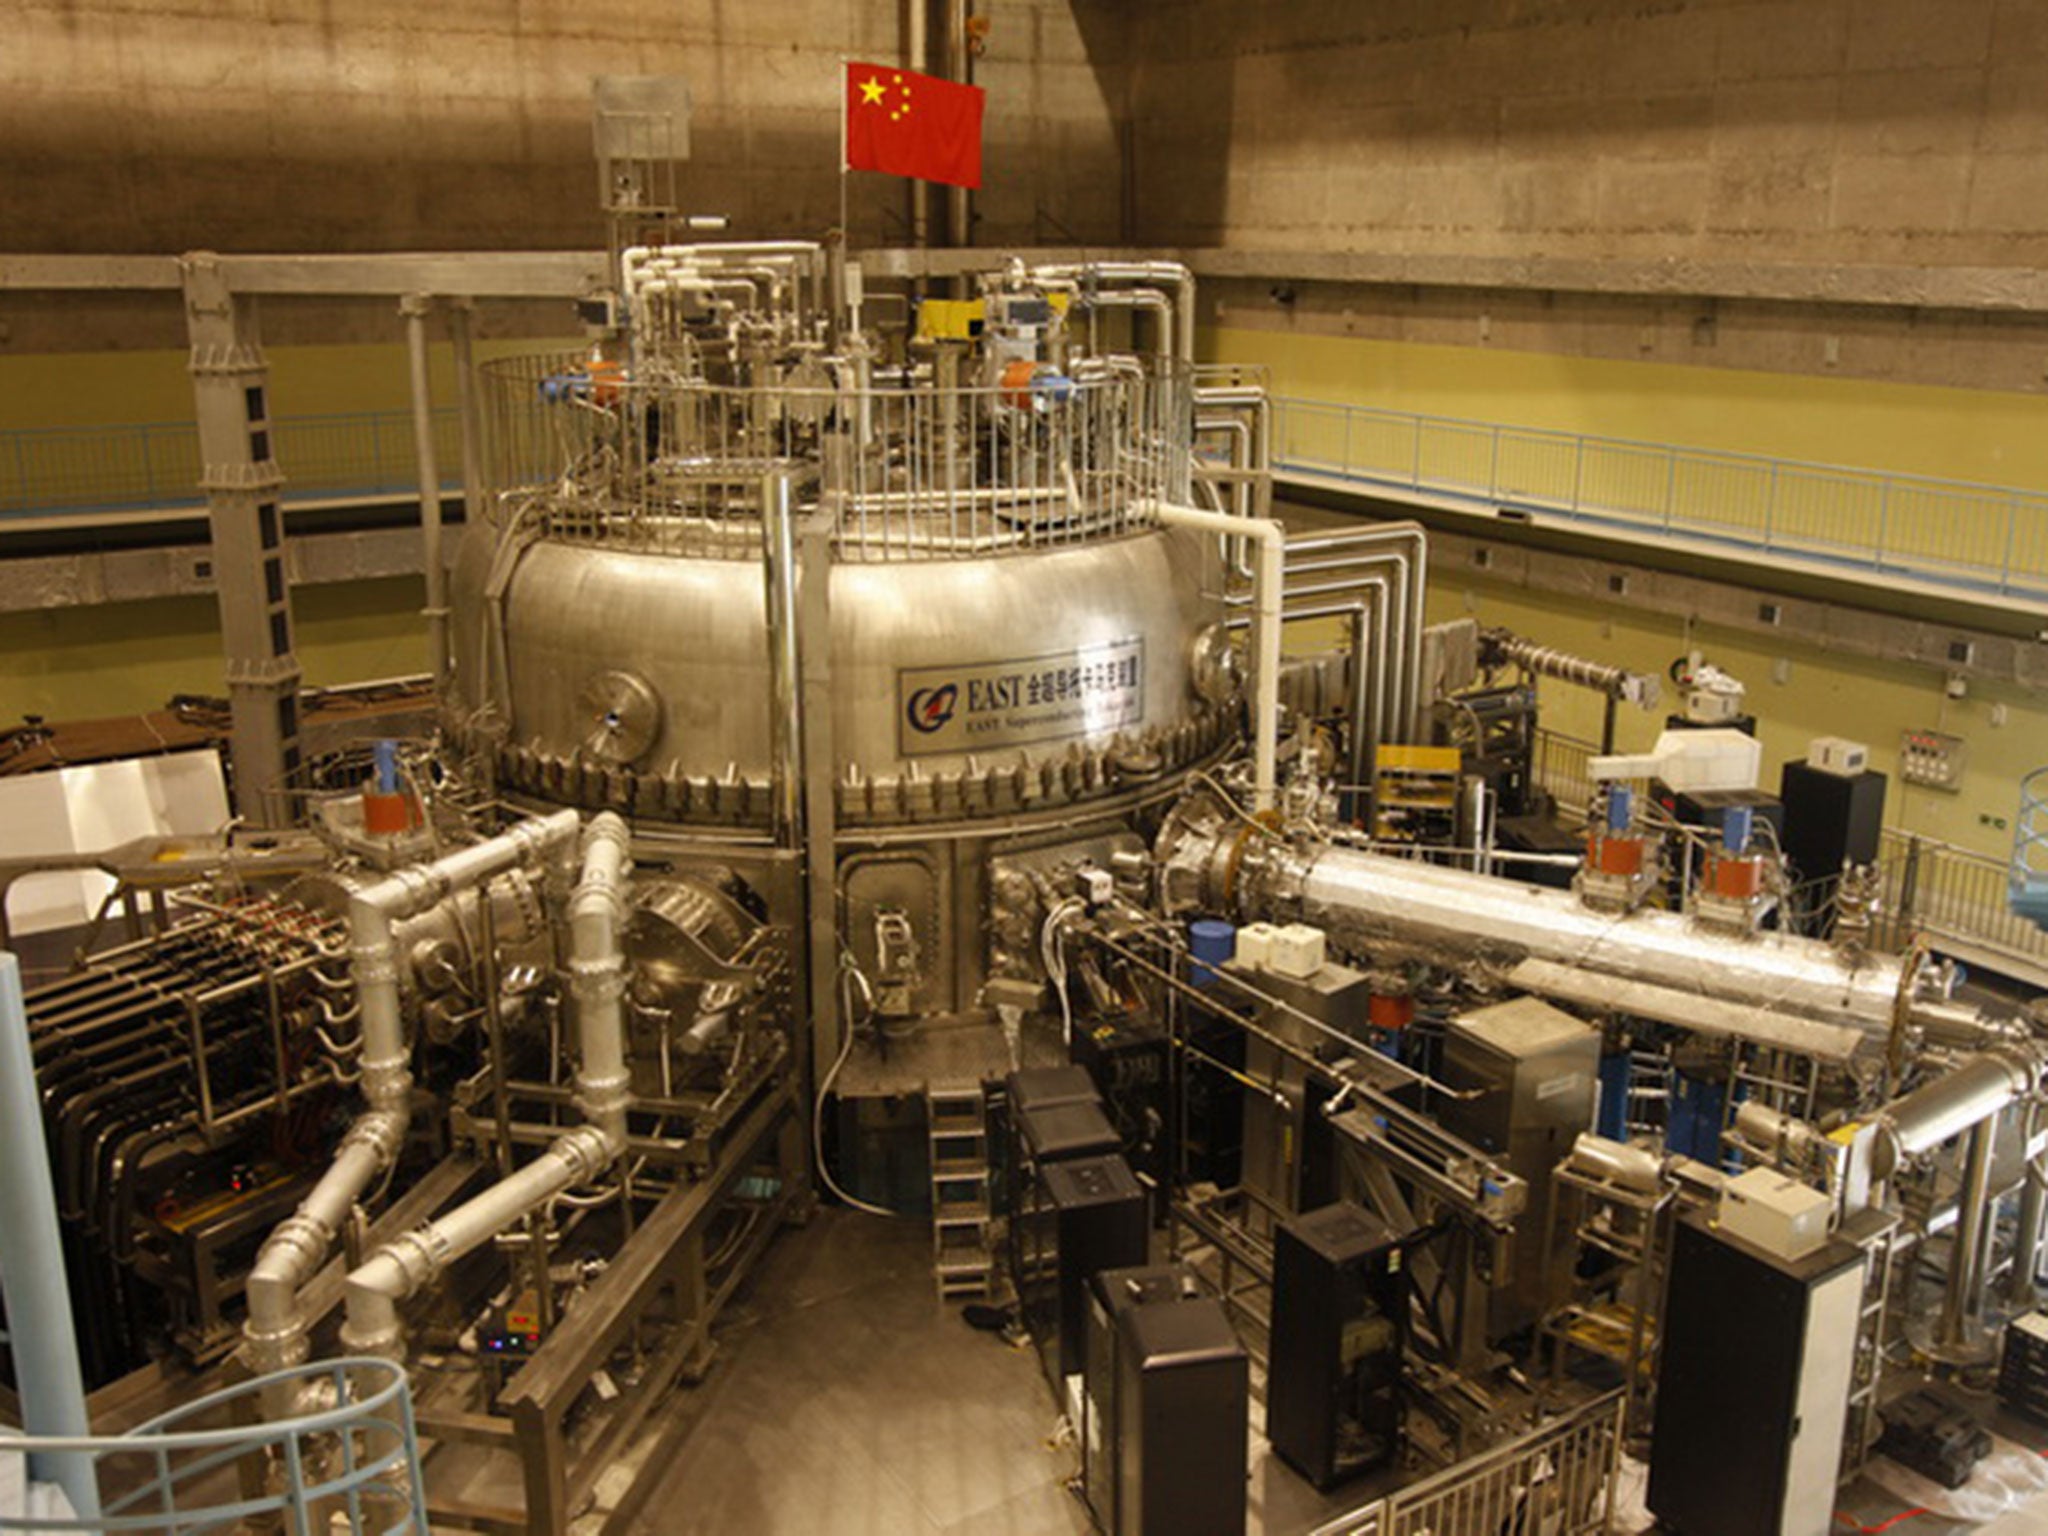 An external view of the EAST nuclear fusion machine